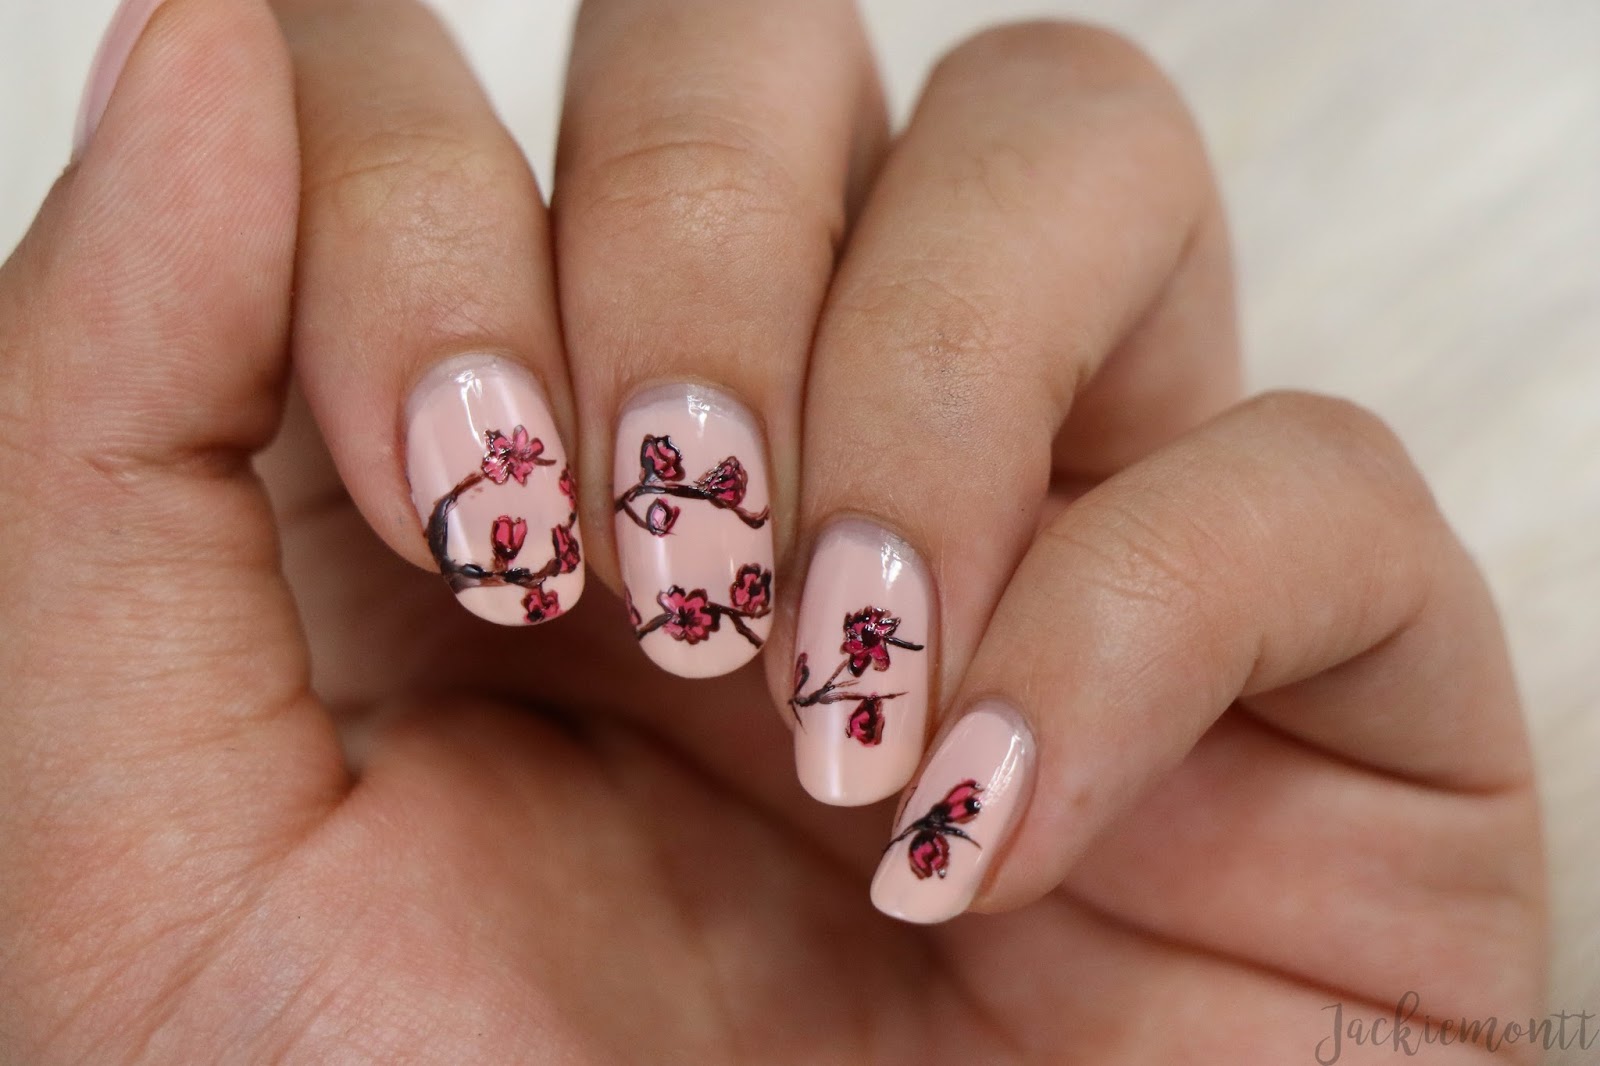 4. Cherry Blossom Nails - wide 7